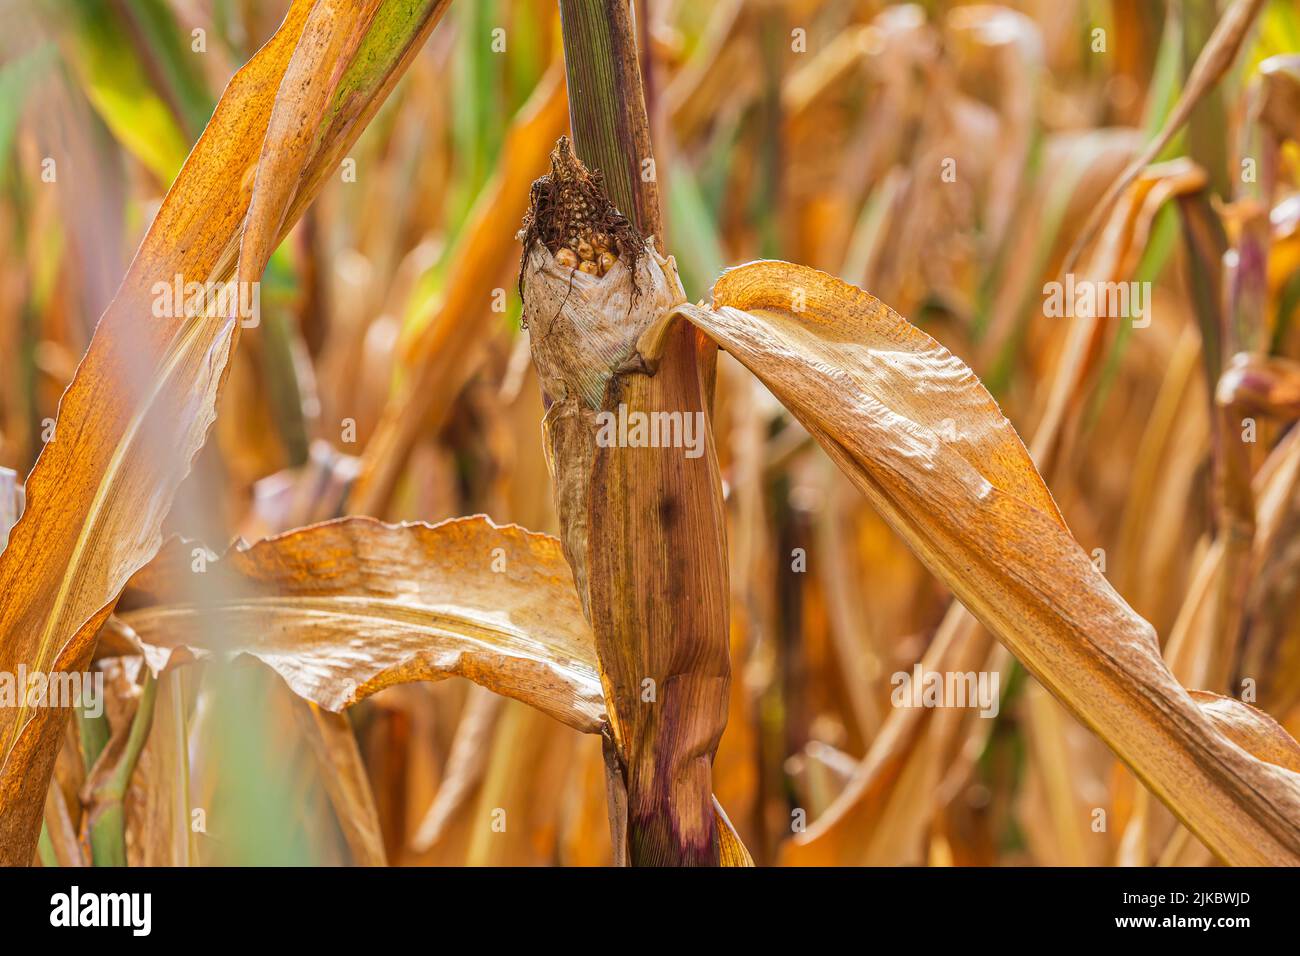 Direct view of a corncob. Corn field in summer with sunshine. Dried fruit in the cornfield. Dried up corn cobs and brown discolored leaves. Stock Photo